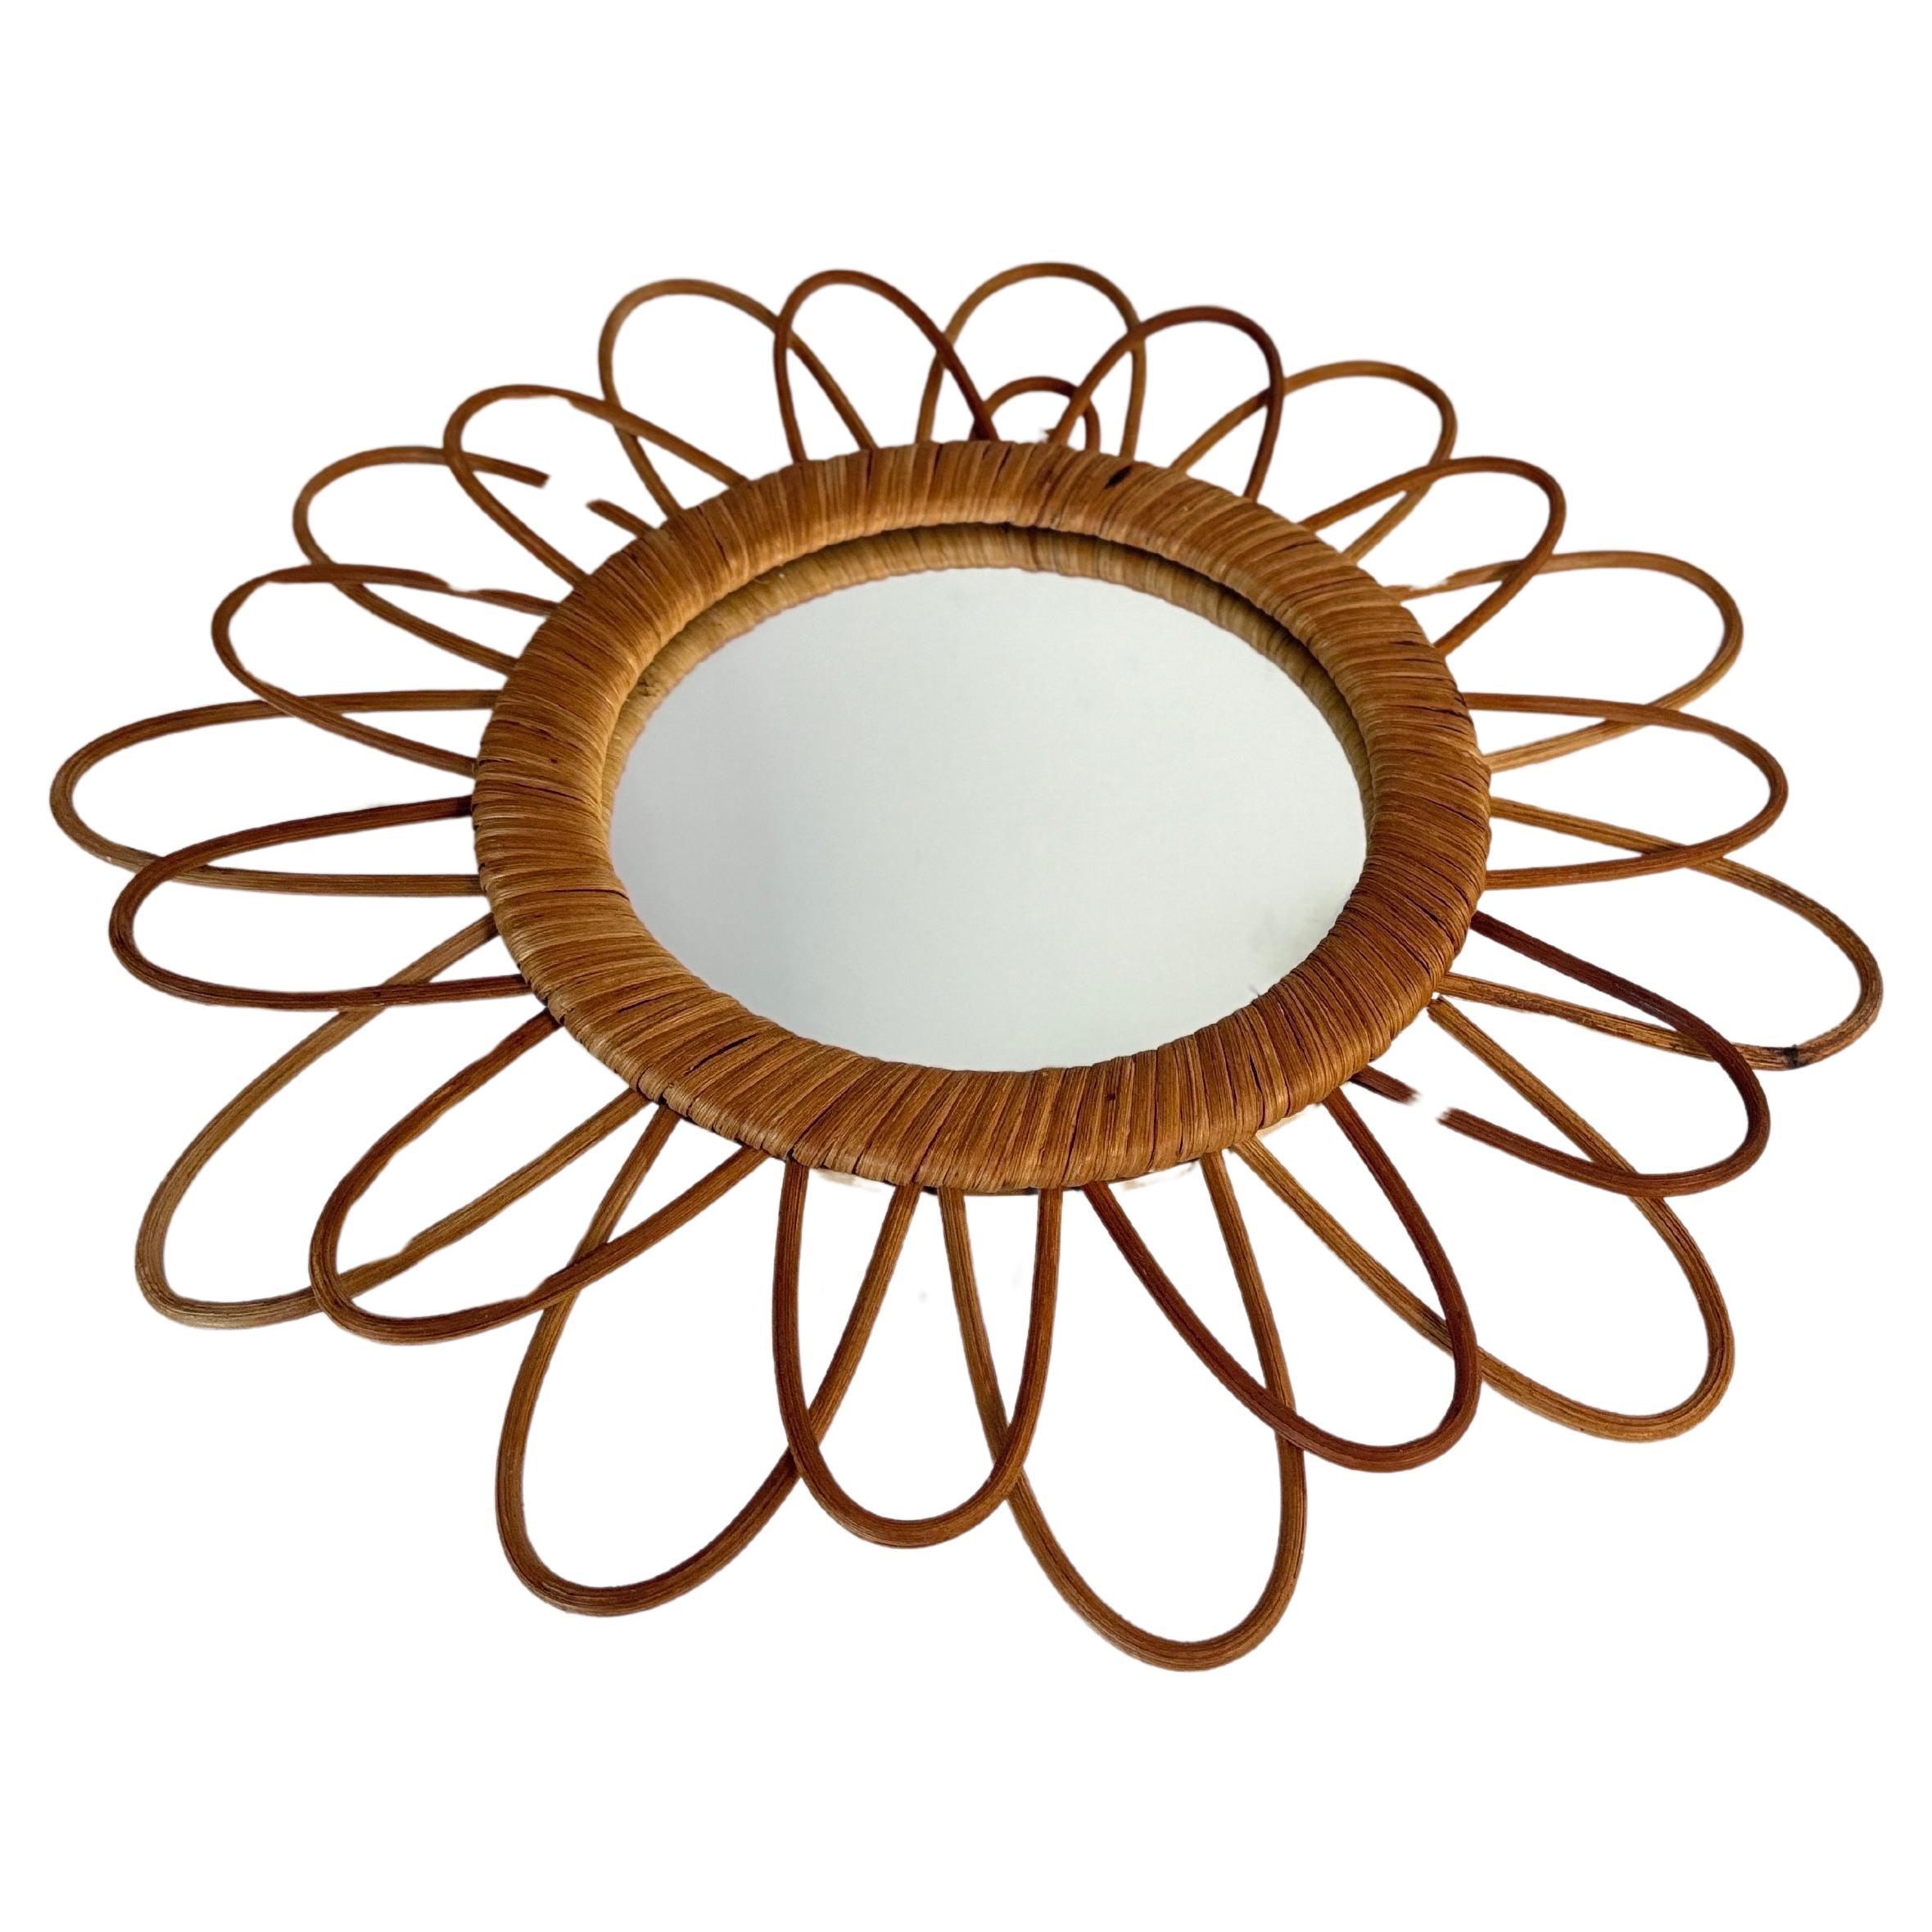 Italian rattan wall mirror (circa 1960s)  Franco Albini style. The mirror has a complex weave of rattan in a series of horseshoe projections on the edge of the frame. There is a lovely aged patina on the rattan; the glass is intact.